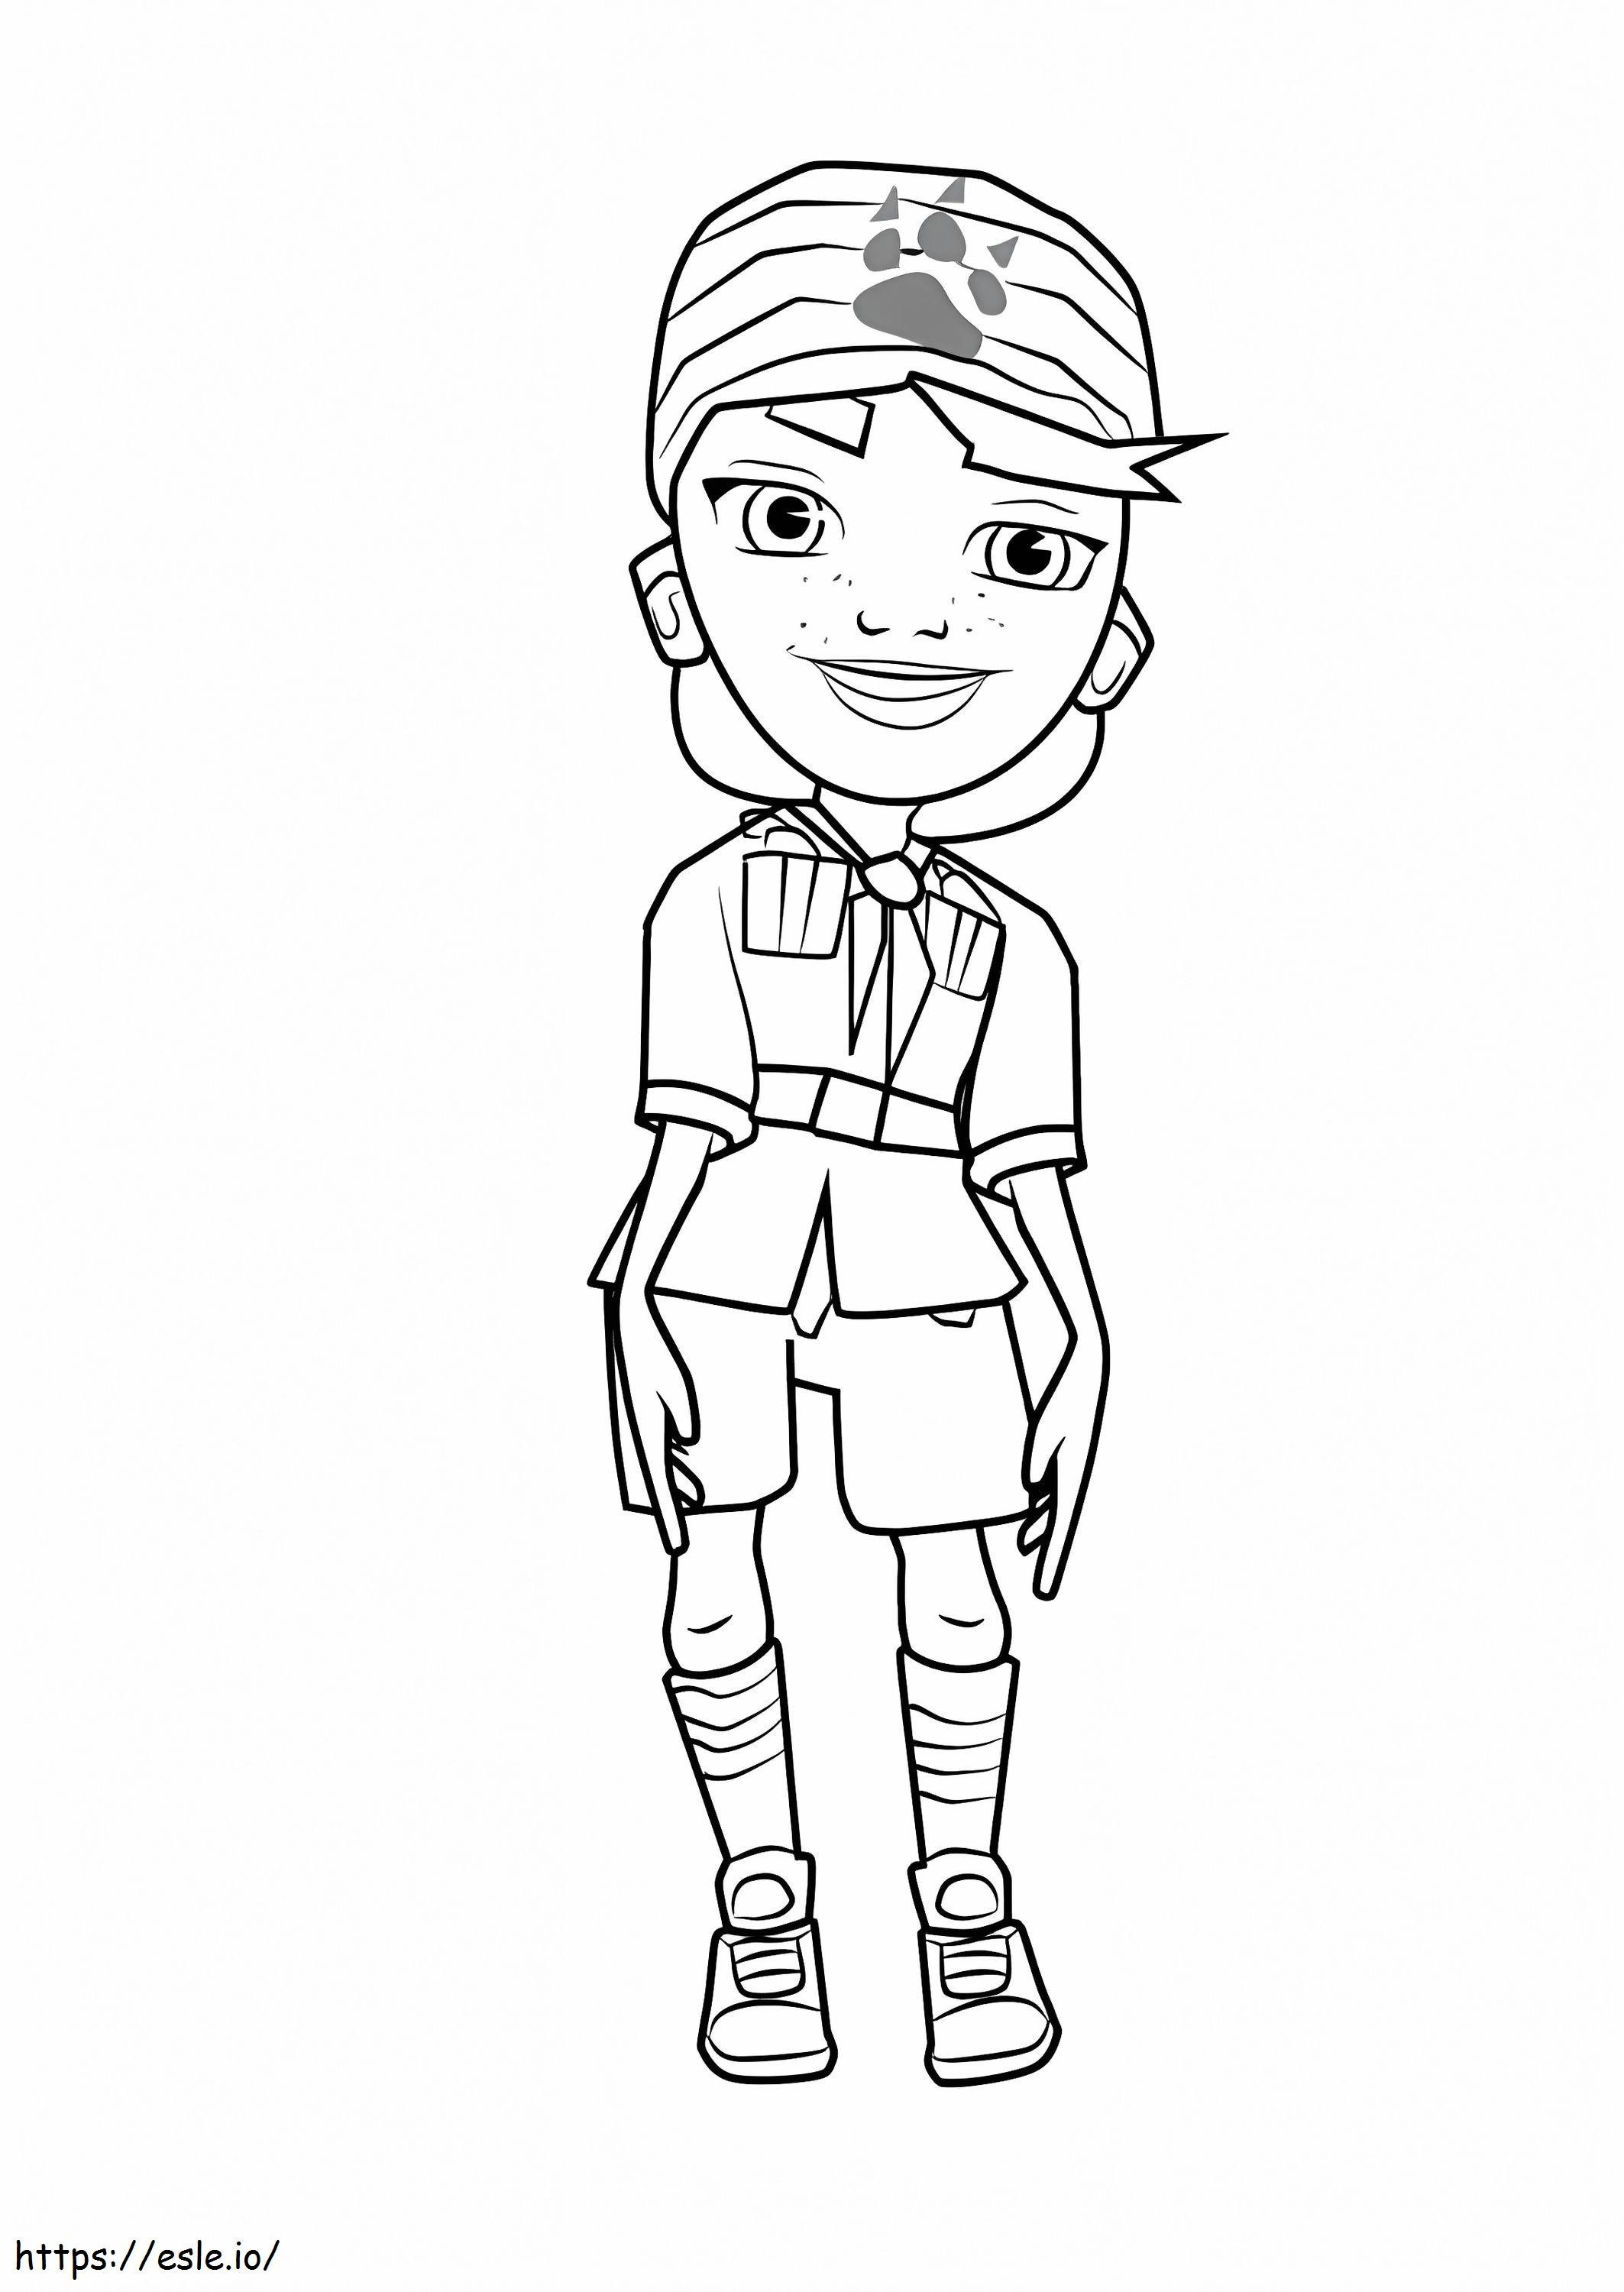 Olivia From Subway Surfers coloring page